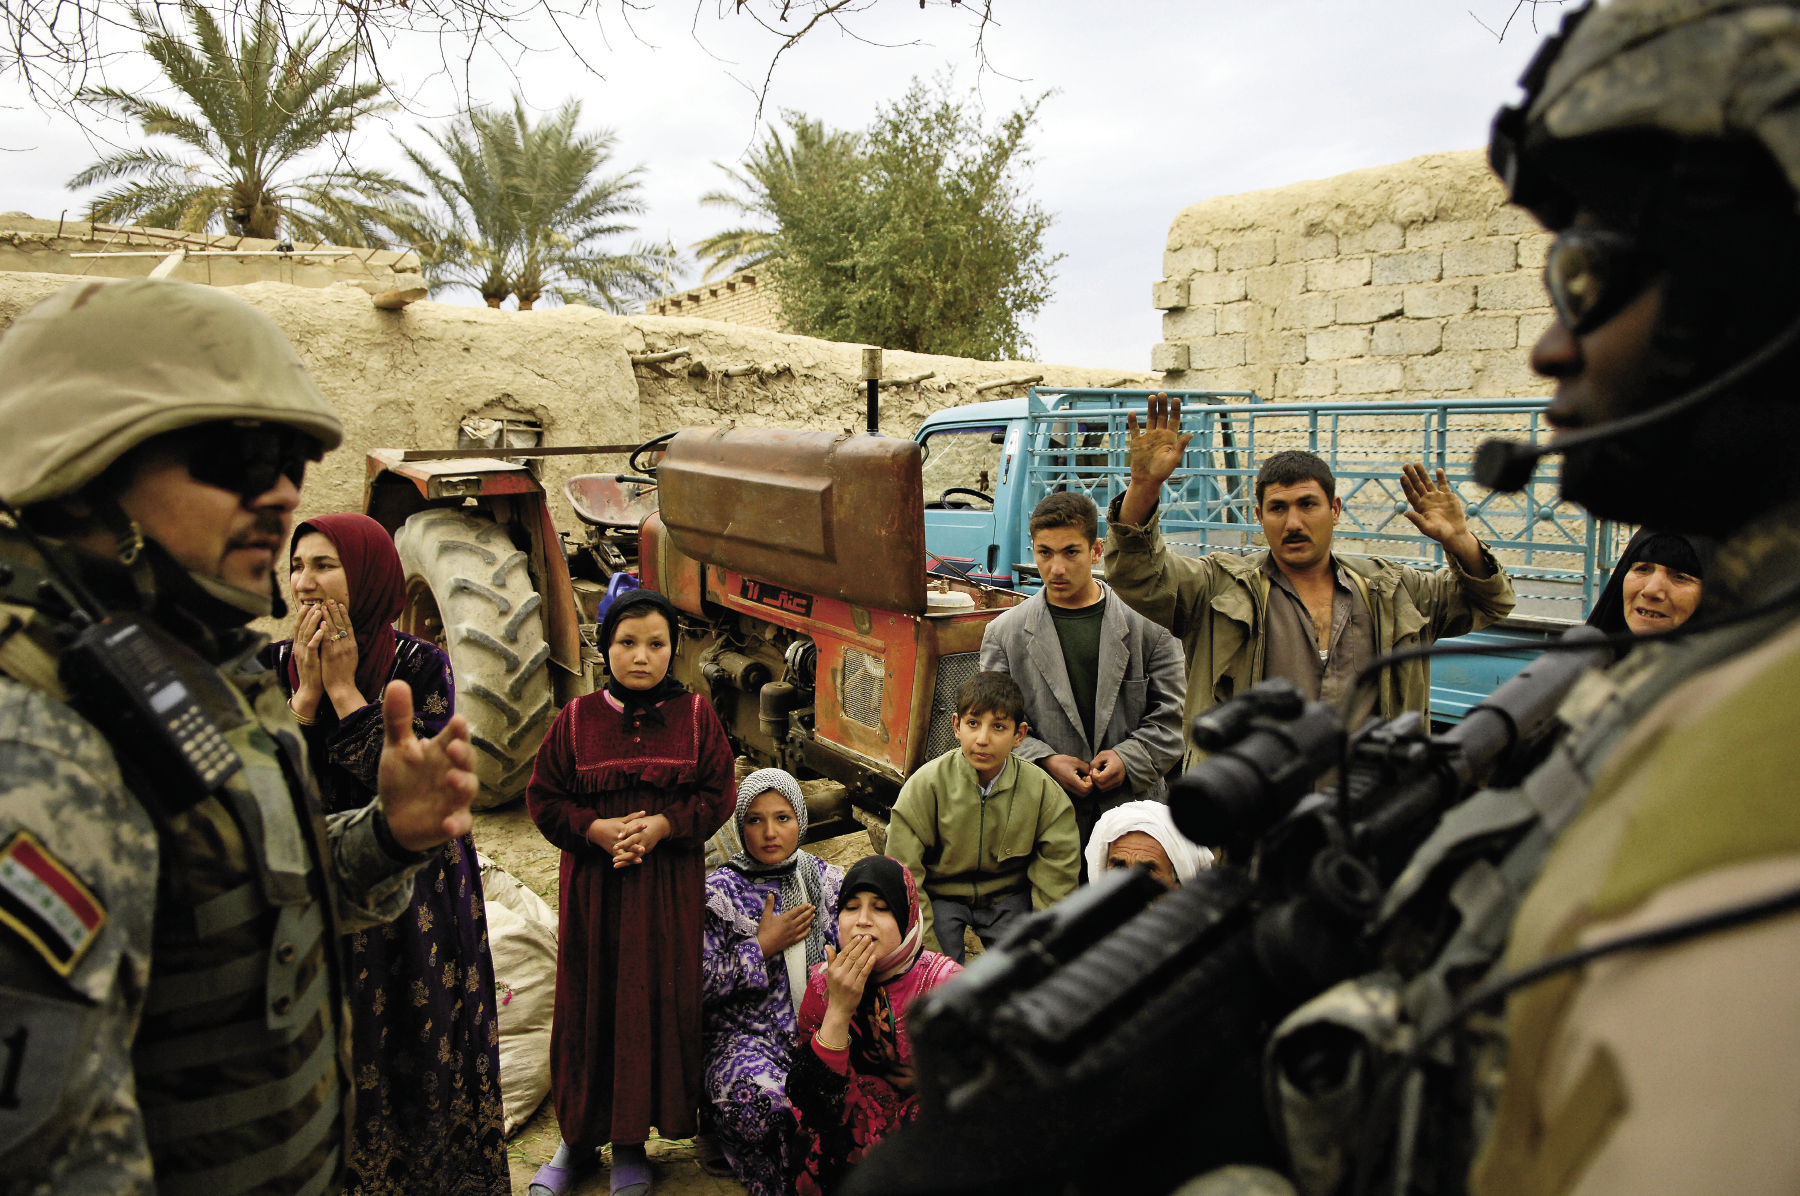 February 10, 2007: While searching for al-Qaeda and Ansar al-Sunna forces during Operation Orange Justice in Buhriz, Iraq, members of the Multi-Iraqi Transitional Team, 4th Battalion, 2nd Brigade, 5th Division question the locals.